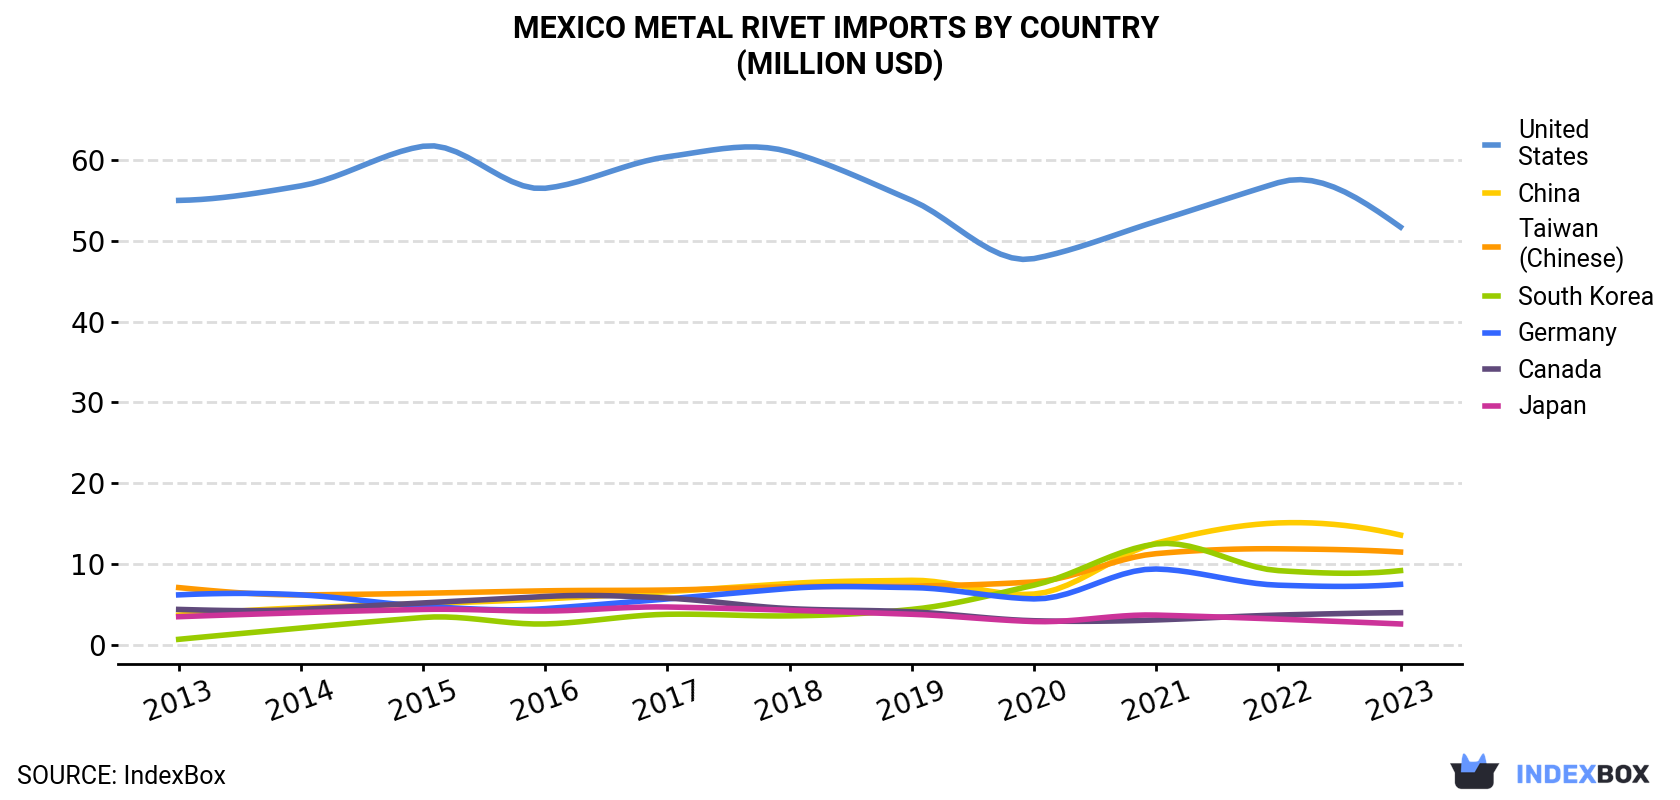 Mexico Metal Rivet Imports By Country (Million USD)